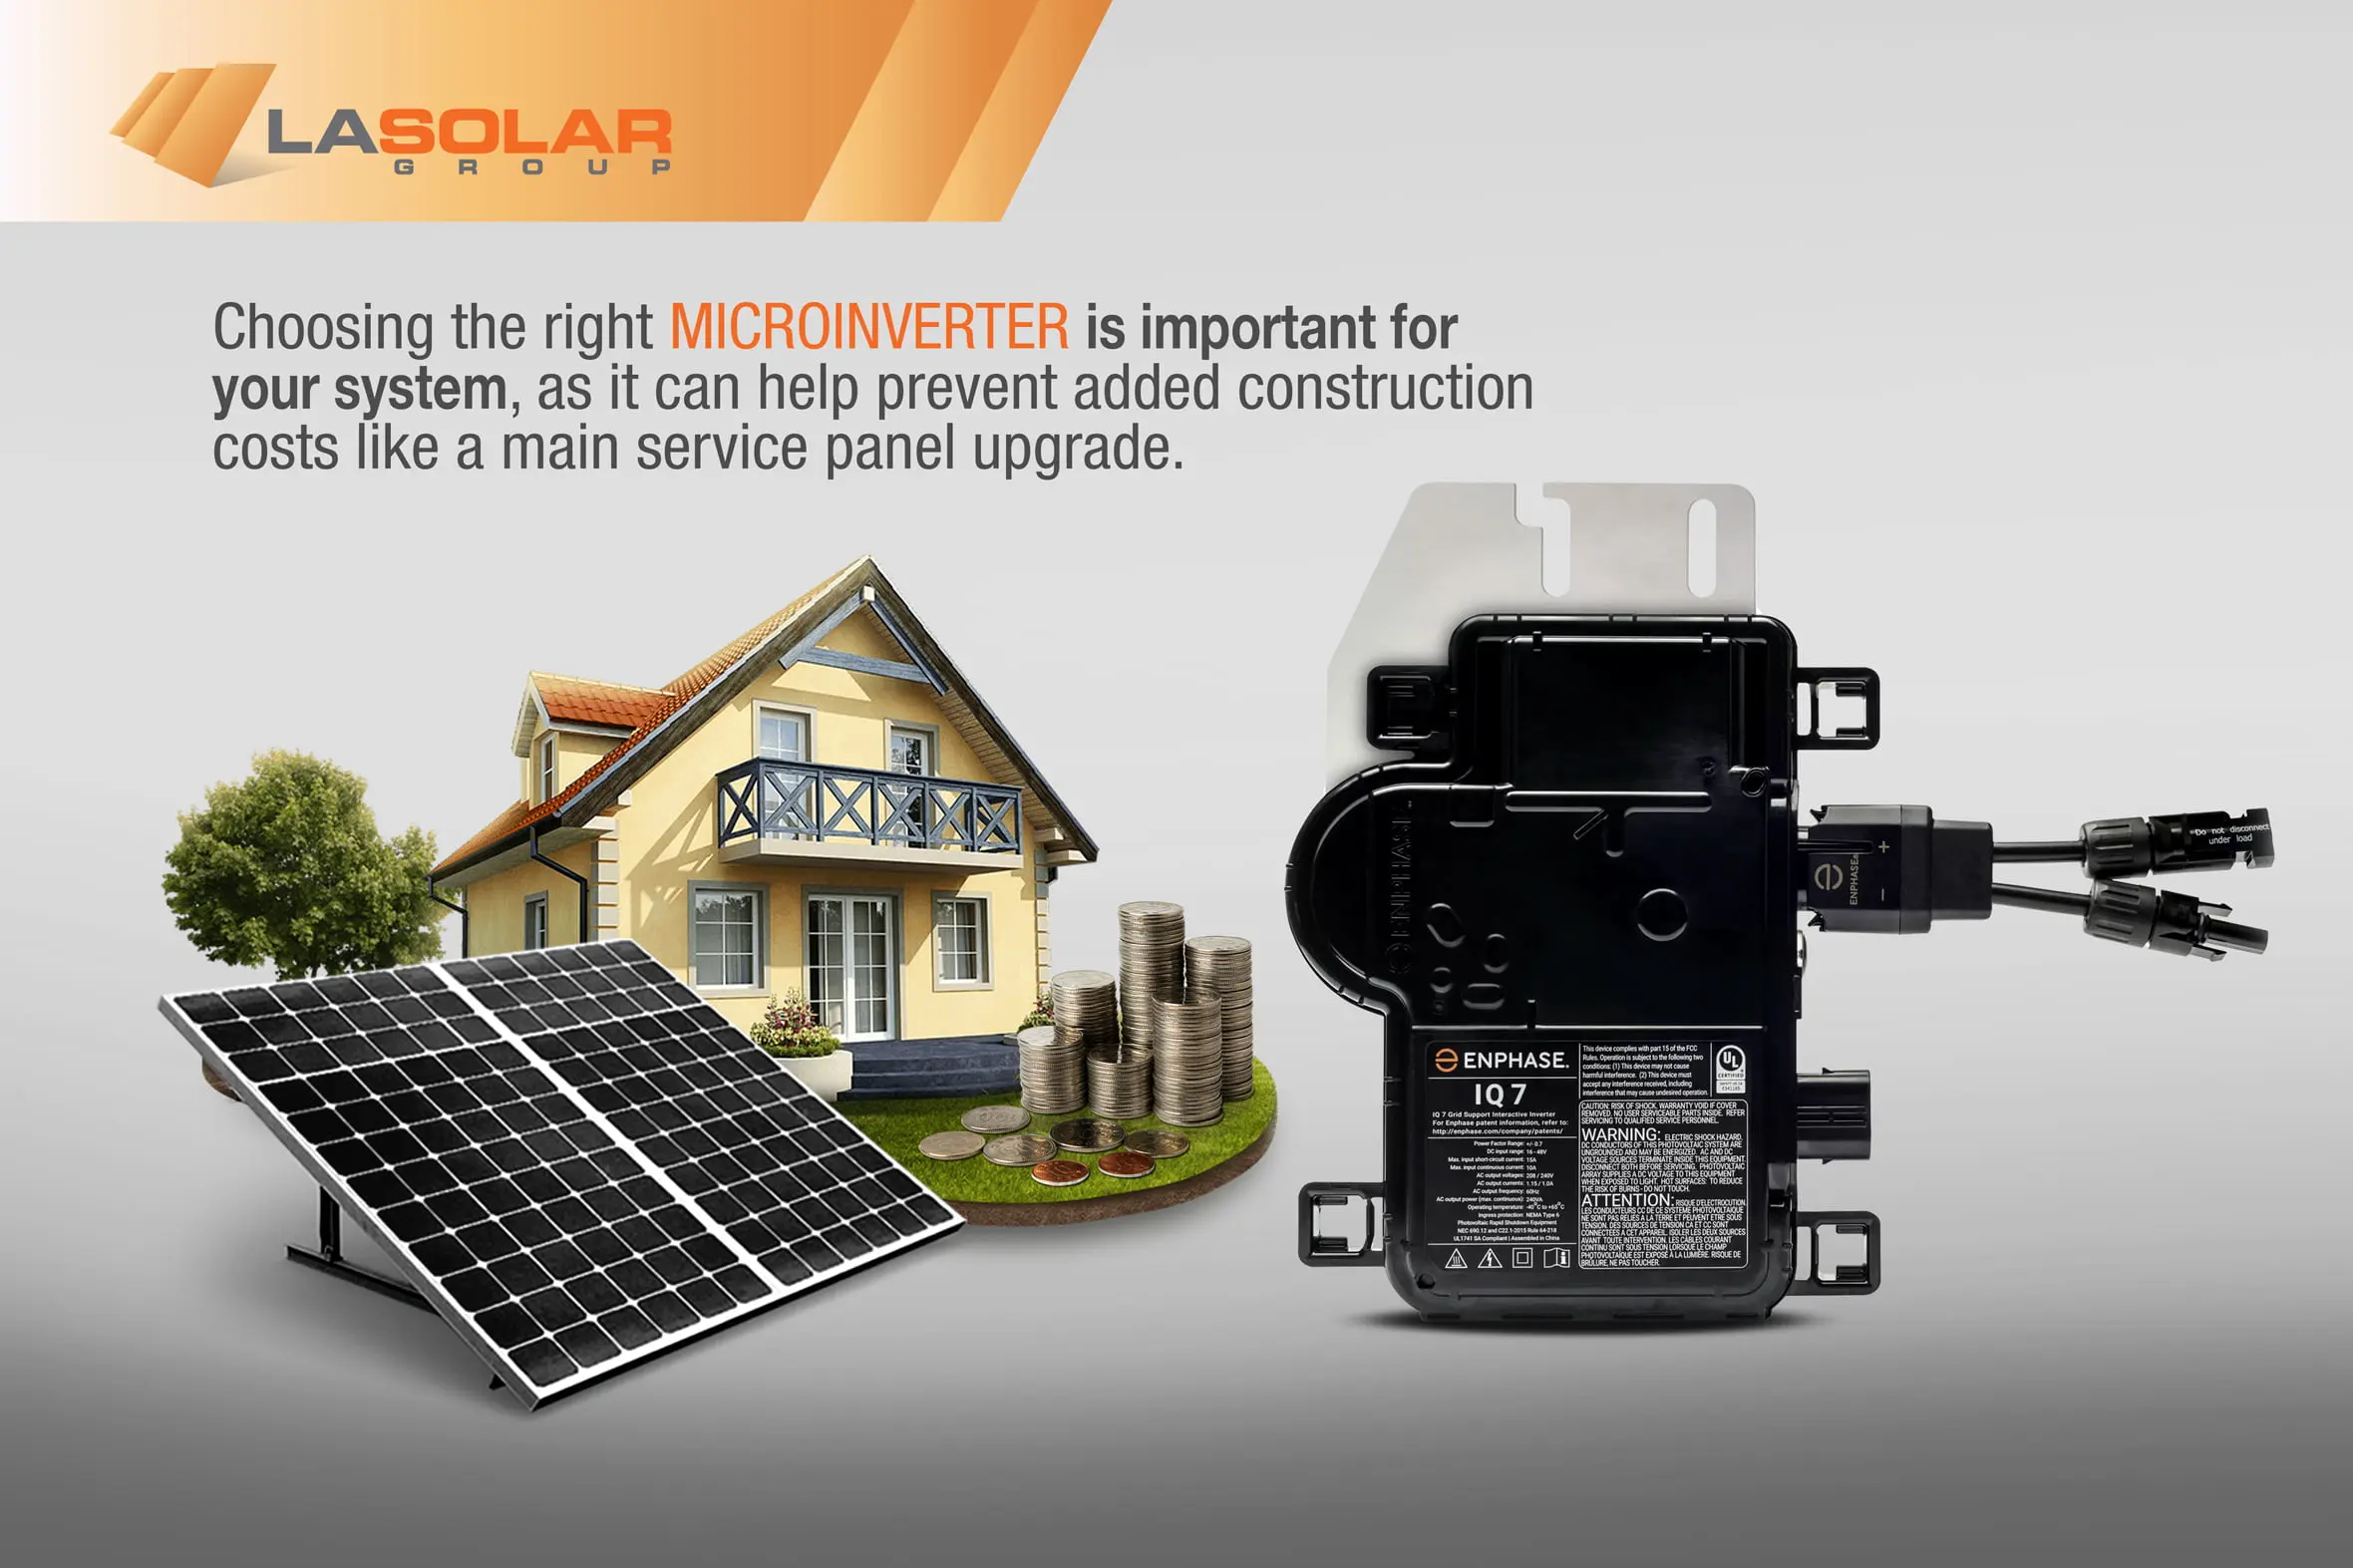 microinverters for solar panels - What are the downsides of Microinverters